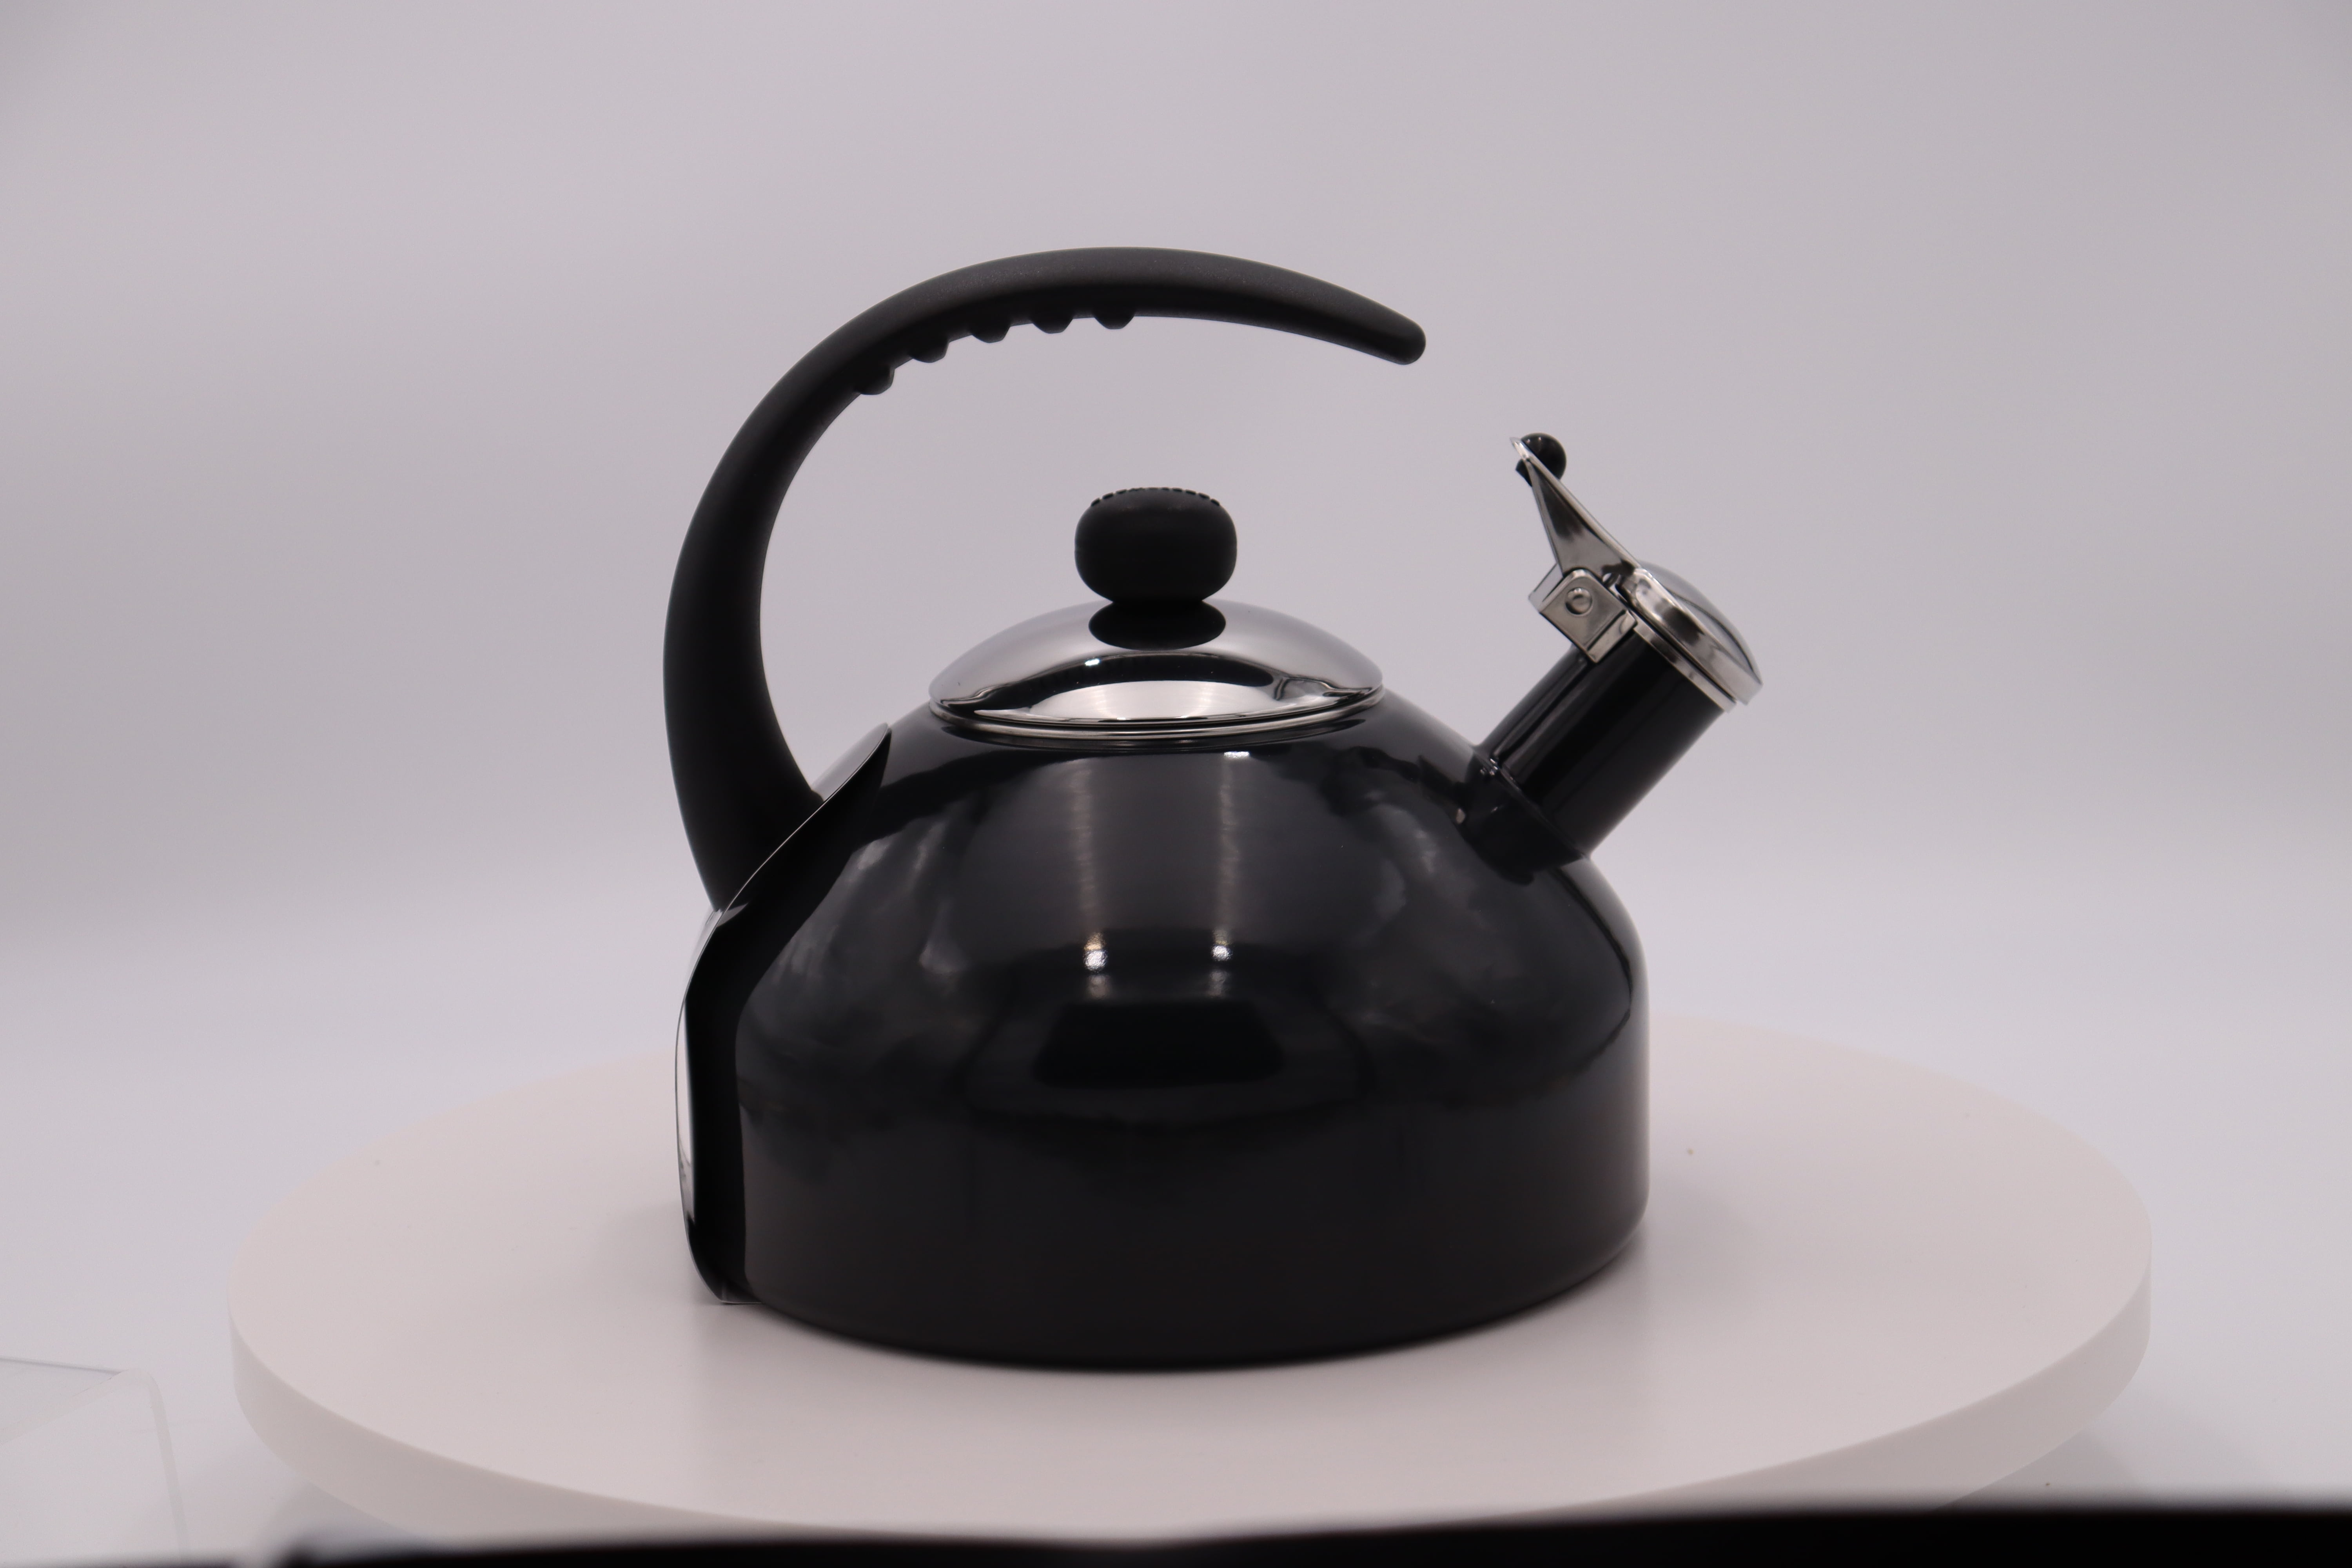  Farberware Omega Tea Kettle, Whistling Tea Pot, Works For All  Stovetops, Porcelain Enamel on Carbon Steel, BPA-Free, Rust-Proof, Stay  Cool Handle, 2.75 quart (11 cups) Capacity(Gray): Home & Kitchen